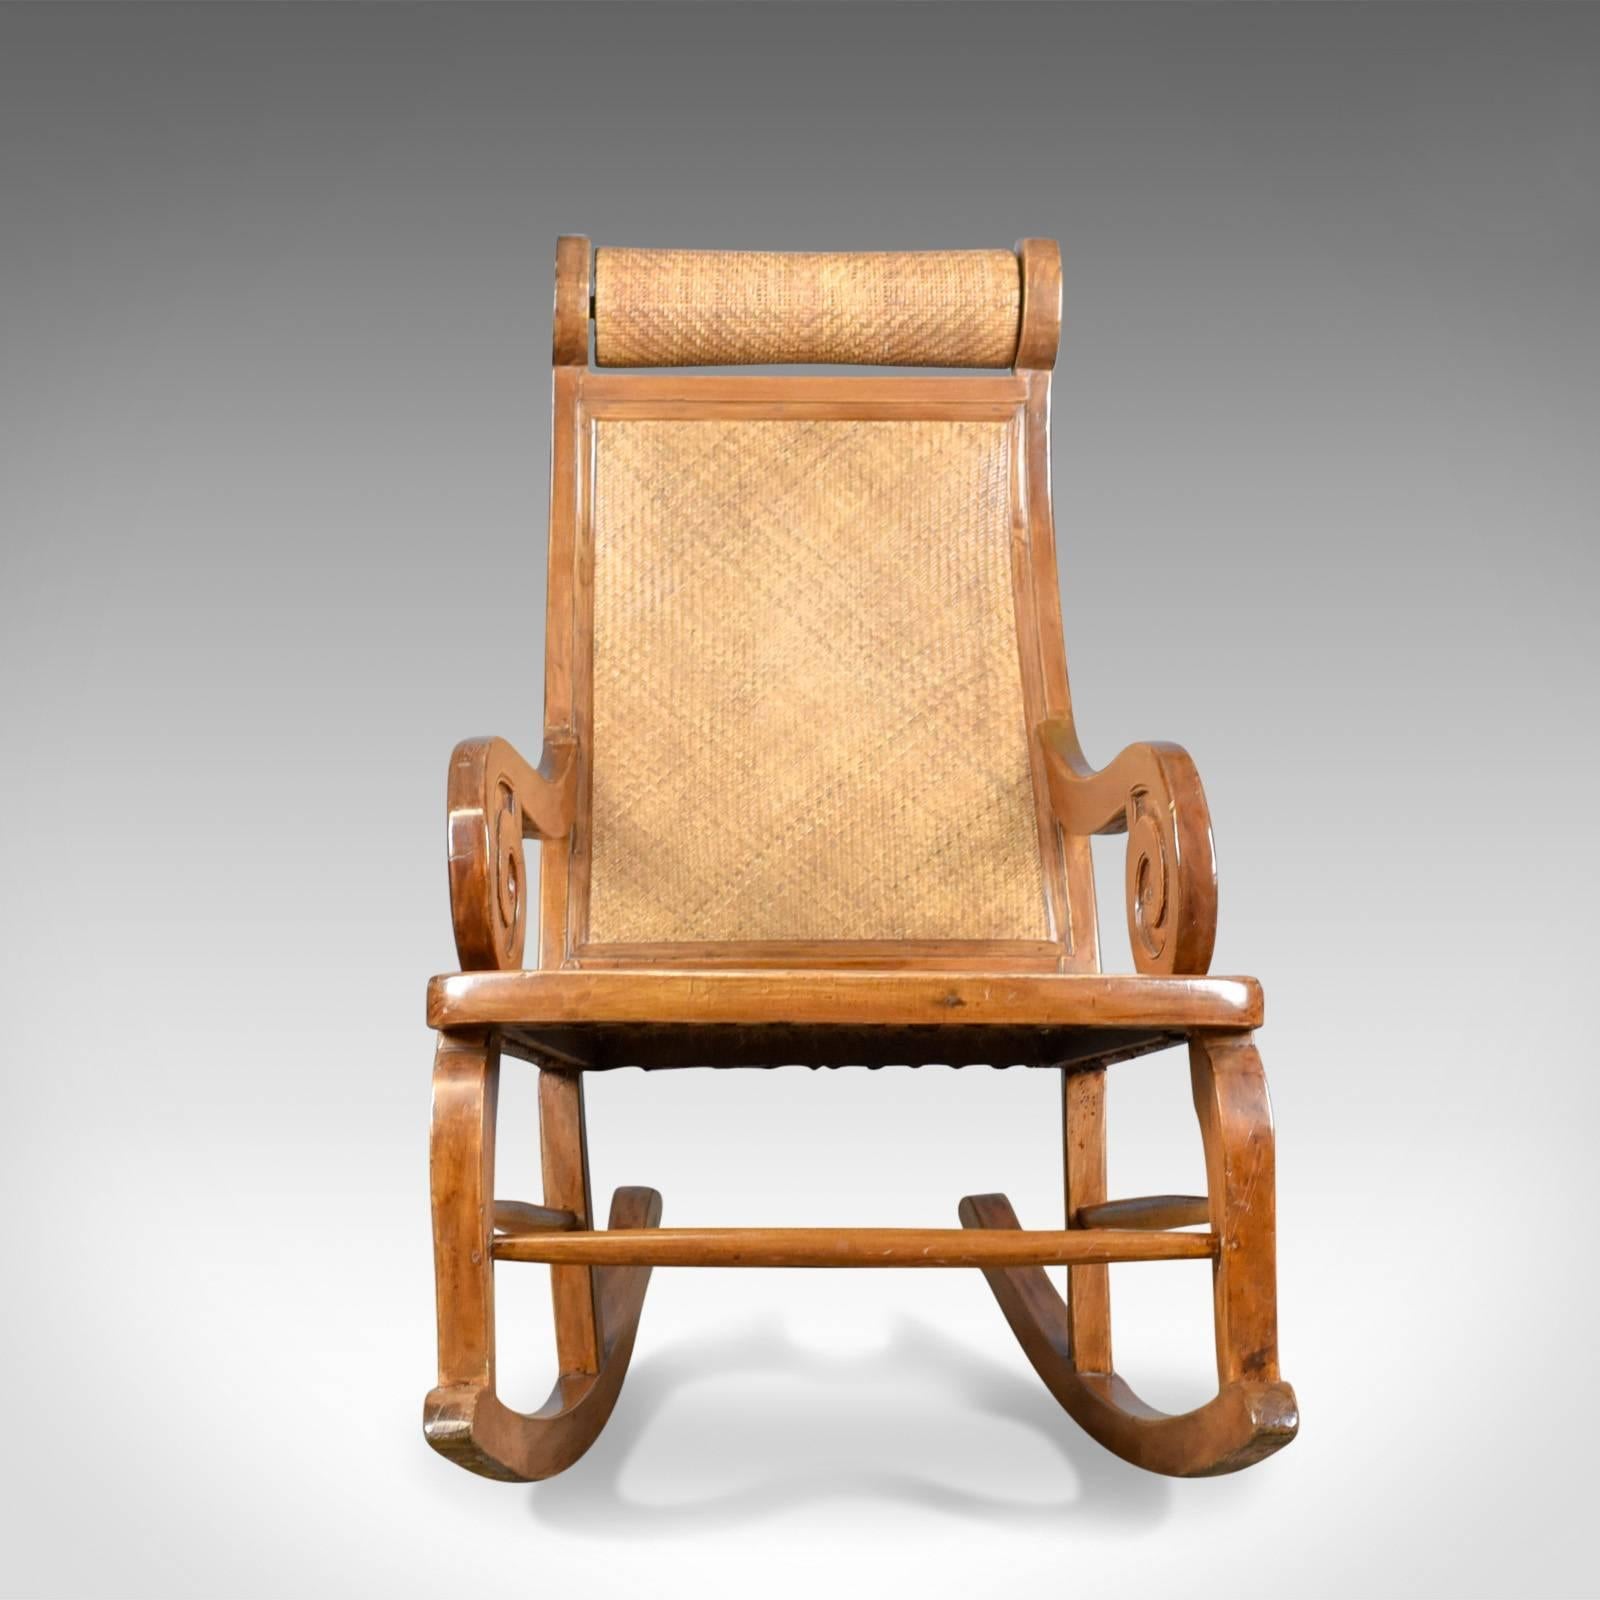 This is a midcentury vintage rocking chair, a hardwood and rattan recliner, circa 1970.

Comfortable high back rocking chair
Hardwood frame in very good order throughout
Displaying attractive caramel tones in a wax polished finish

Deep,